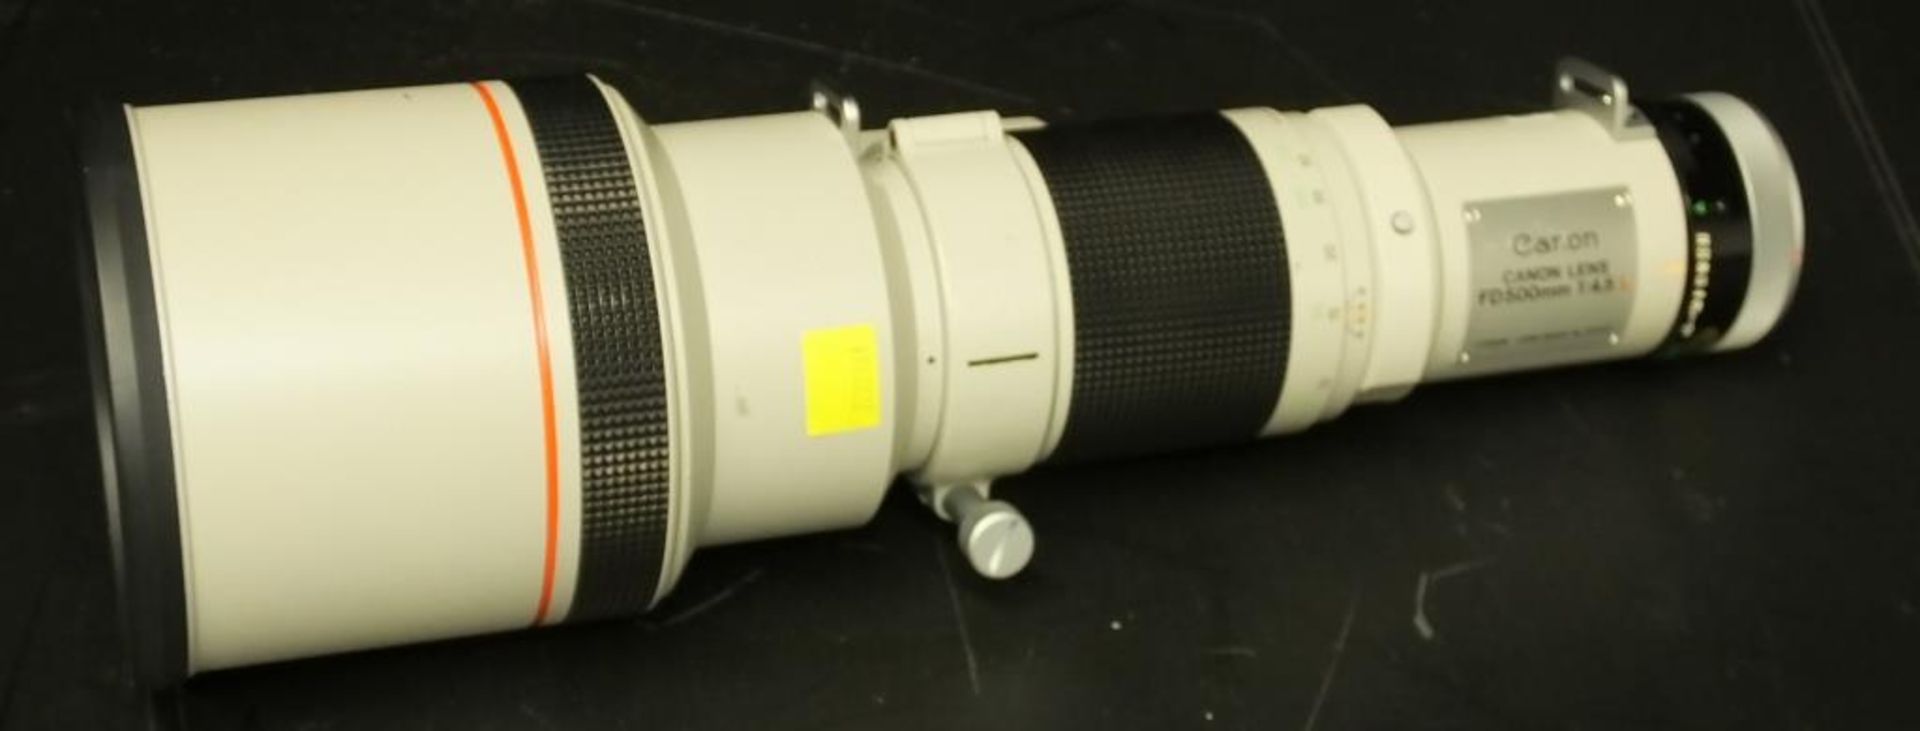 Canon lens FD 500mm 1:4.5 L - serial 10310 - lens cover, Canon carry case - slight dent - Image 2 of 17